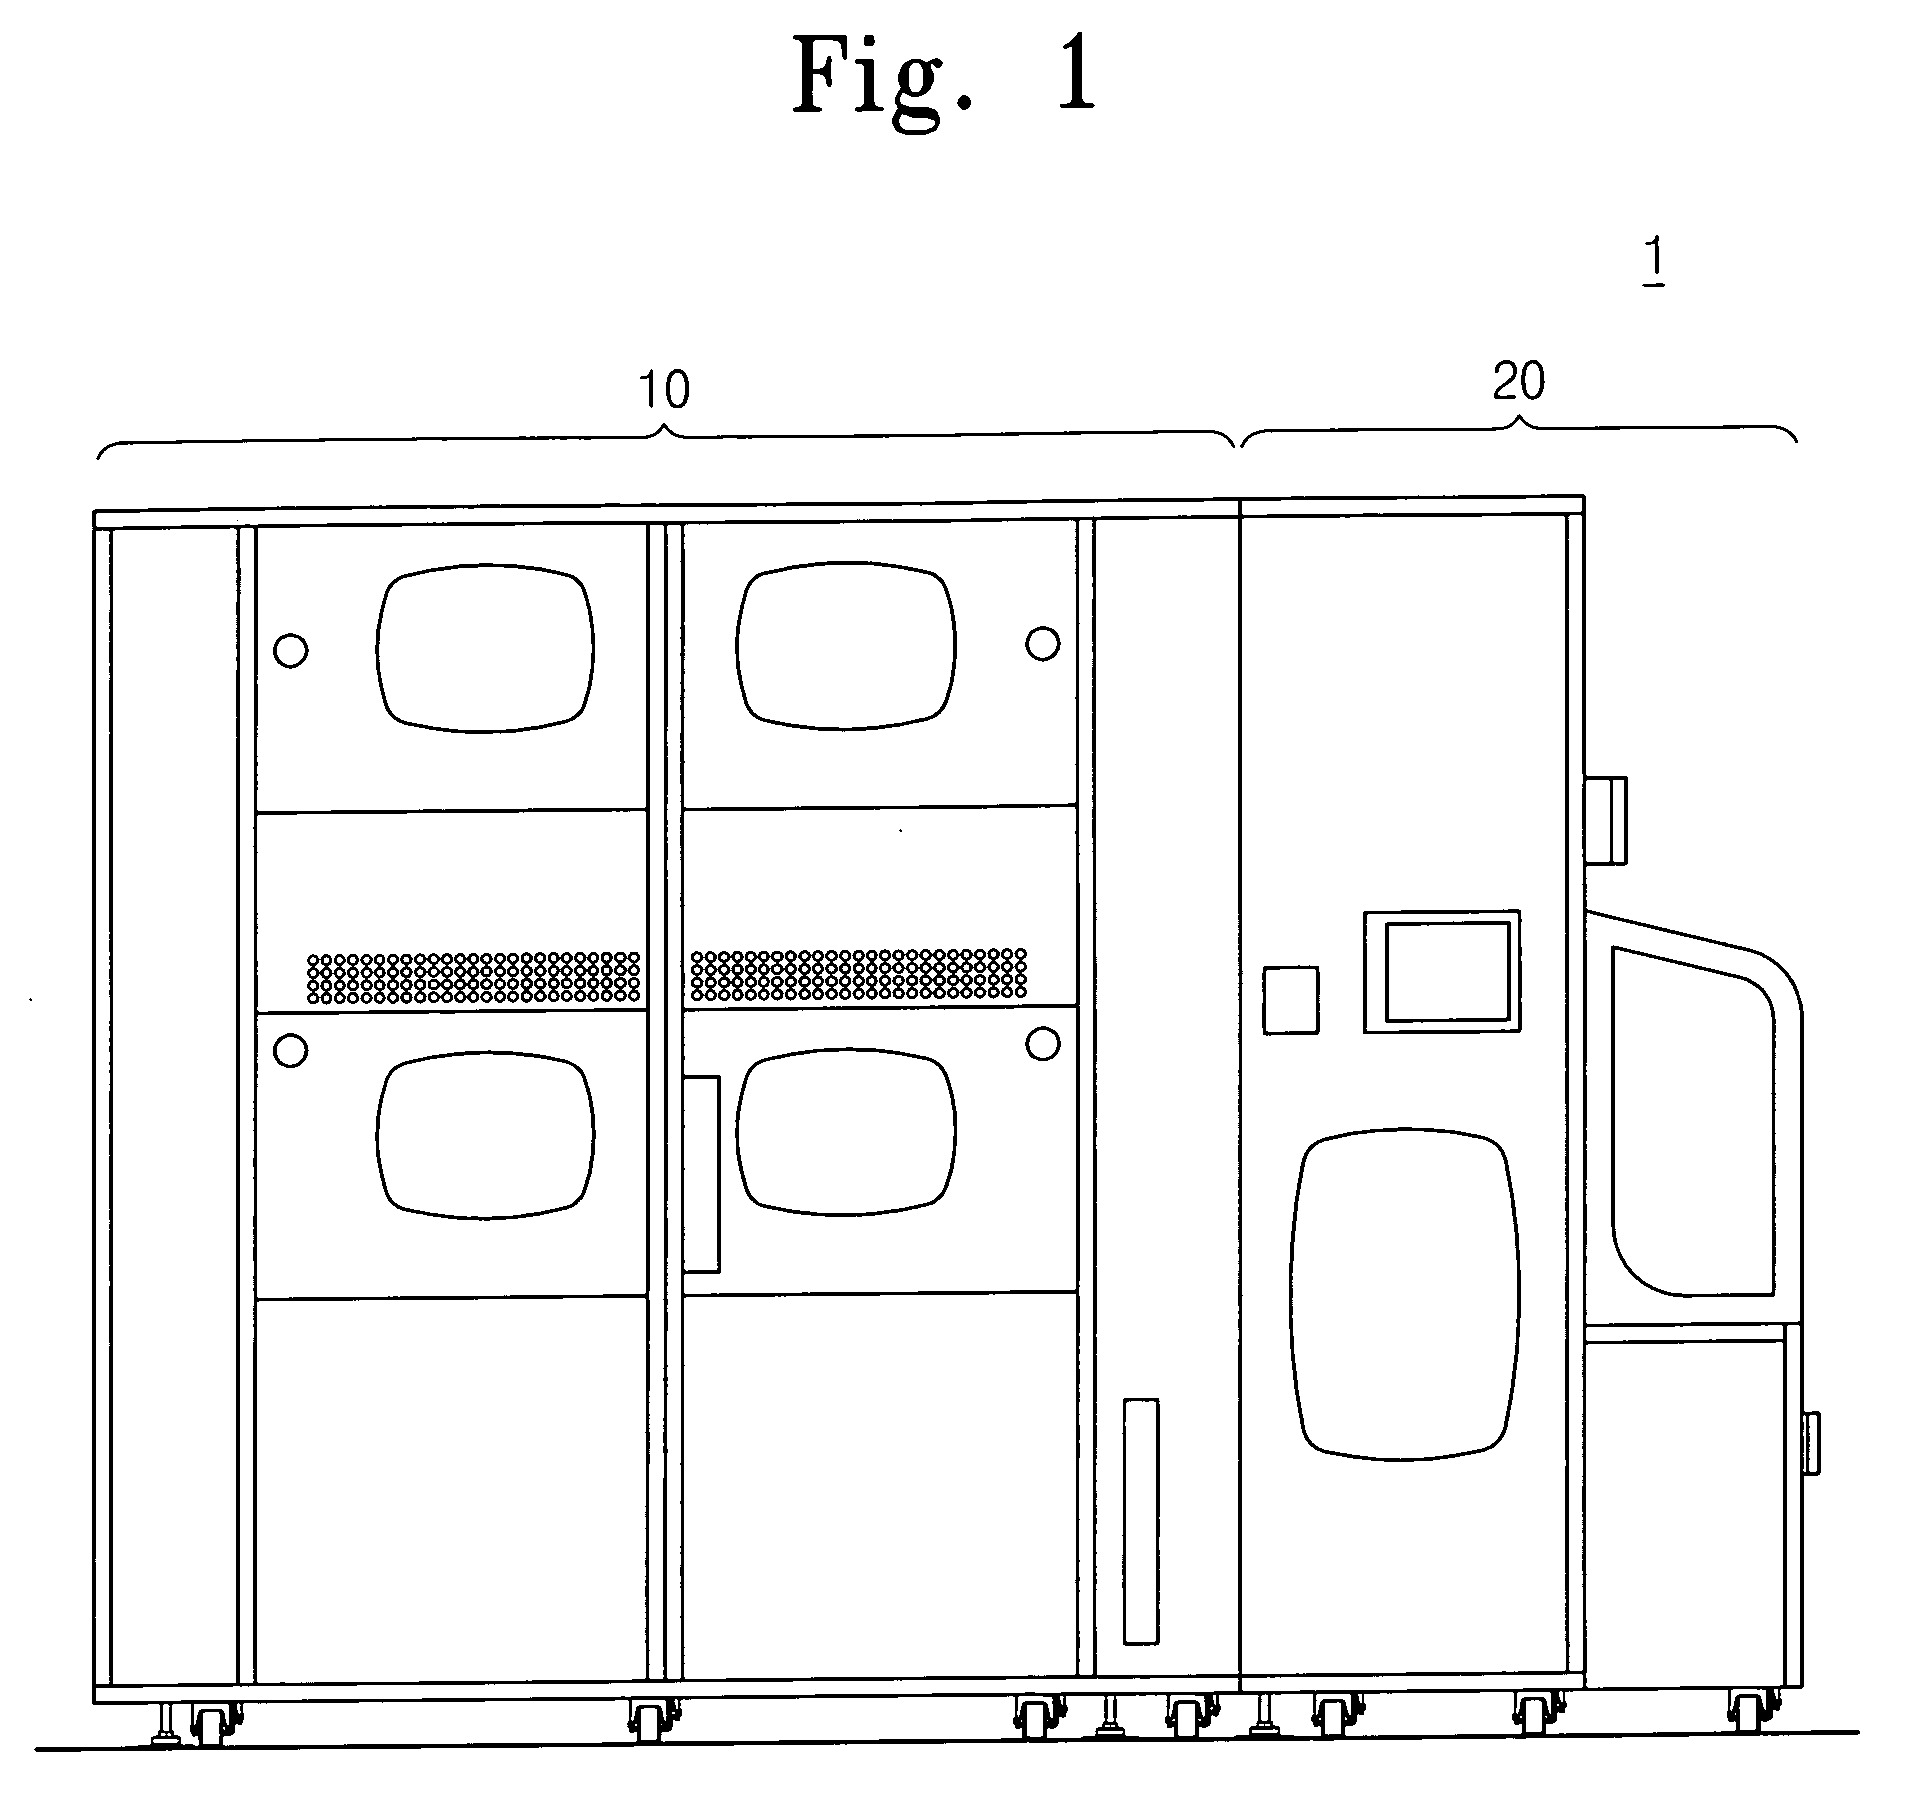 Substrate treating apparatus and method of manufacturing the same